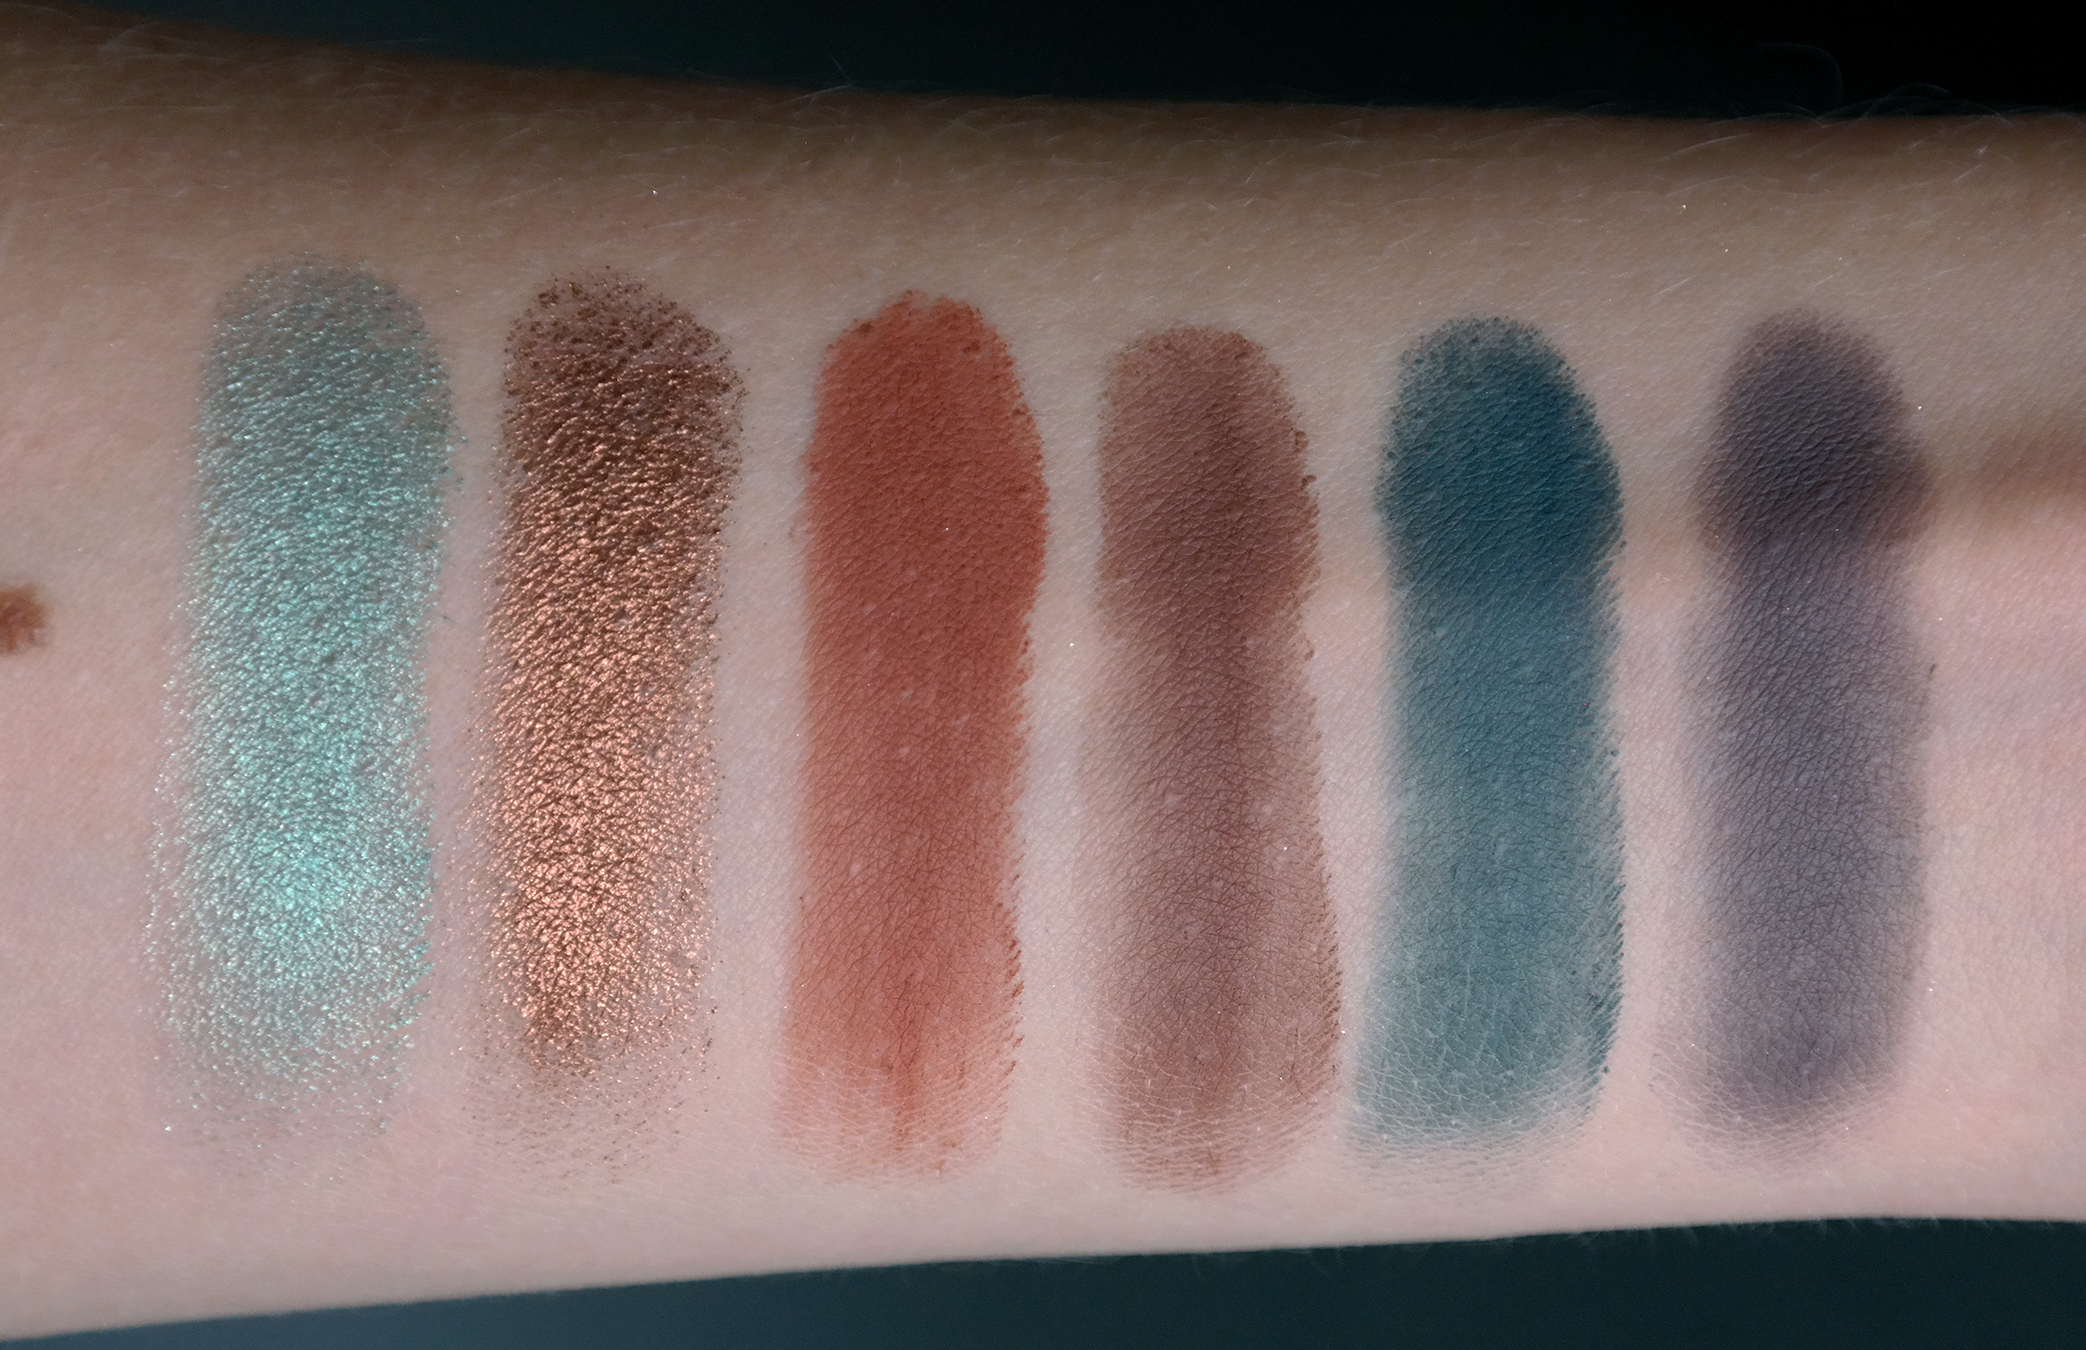 Urban Decay Naked Wild West swatches